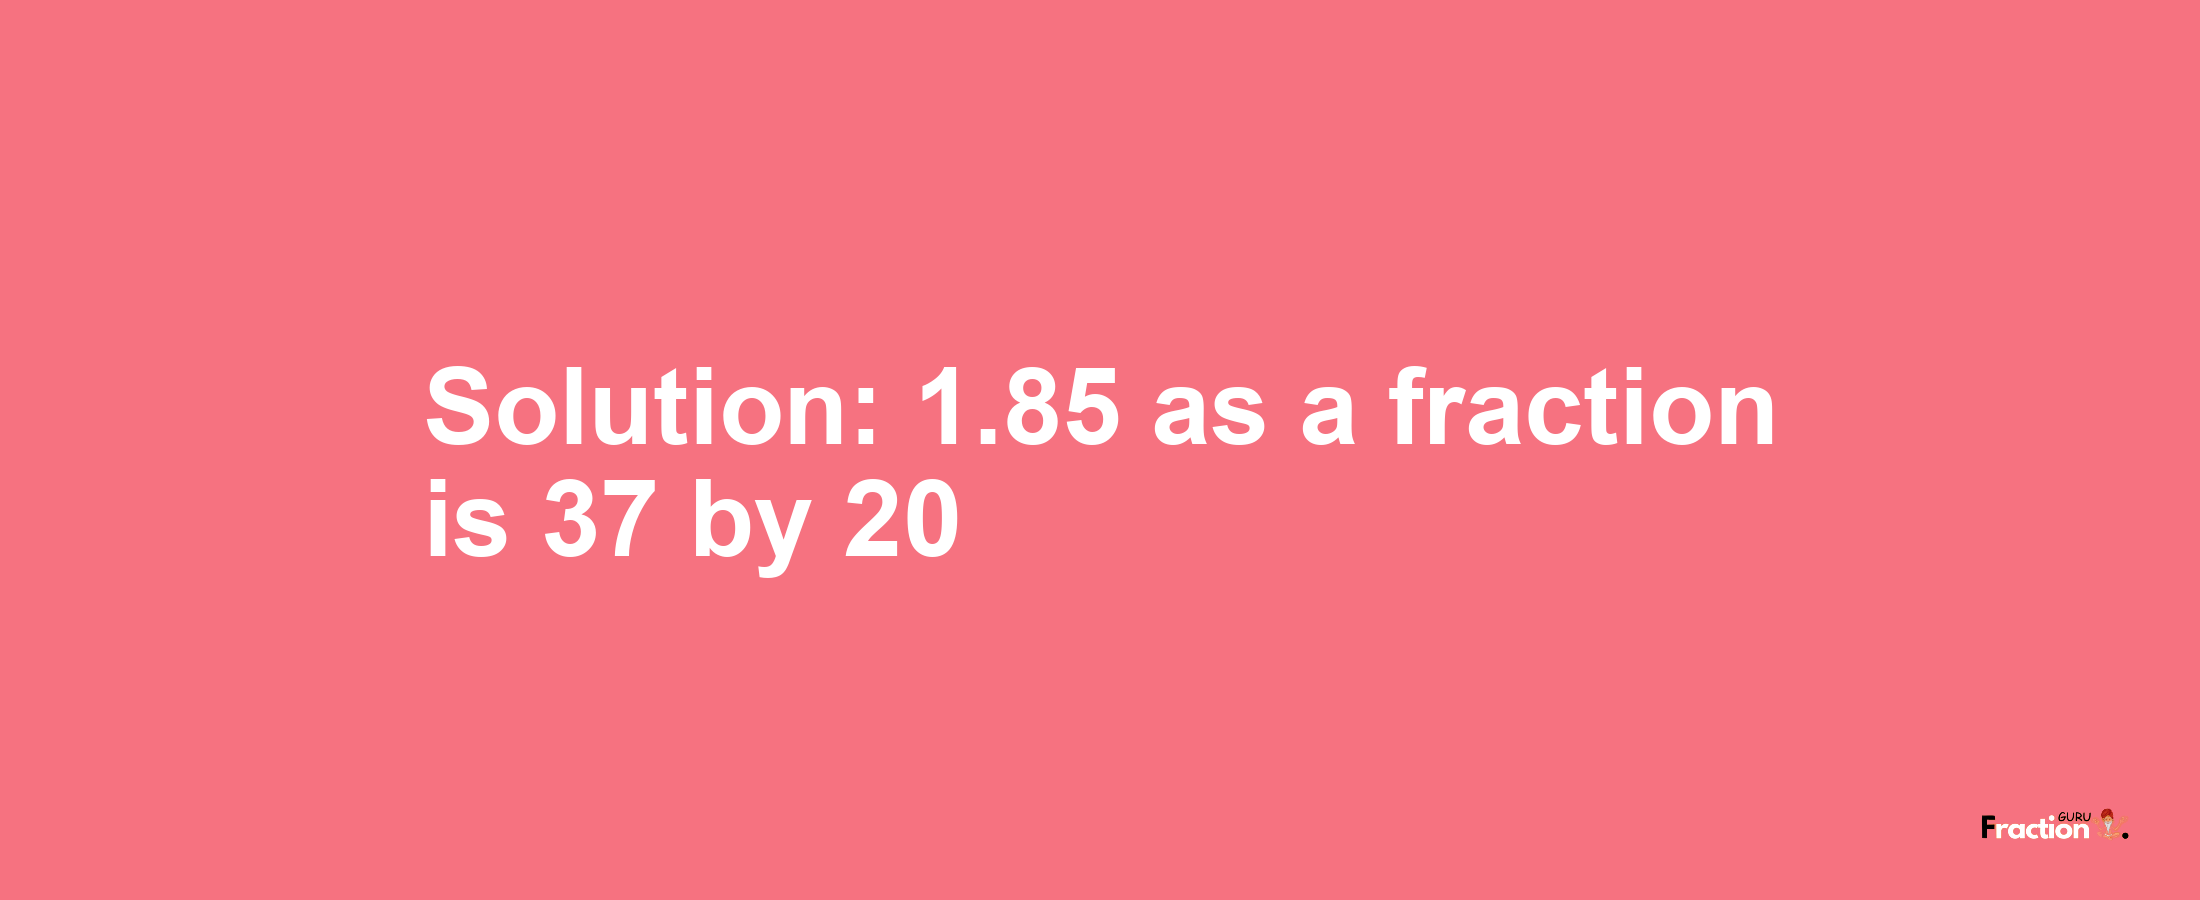 Solution:1.85 as a fraction is 37/20